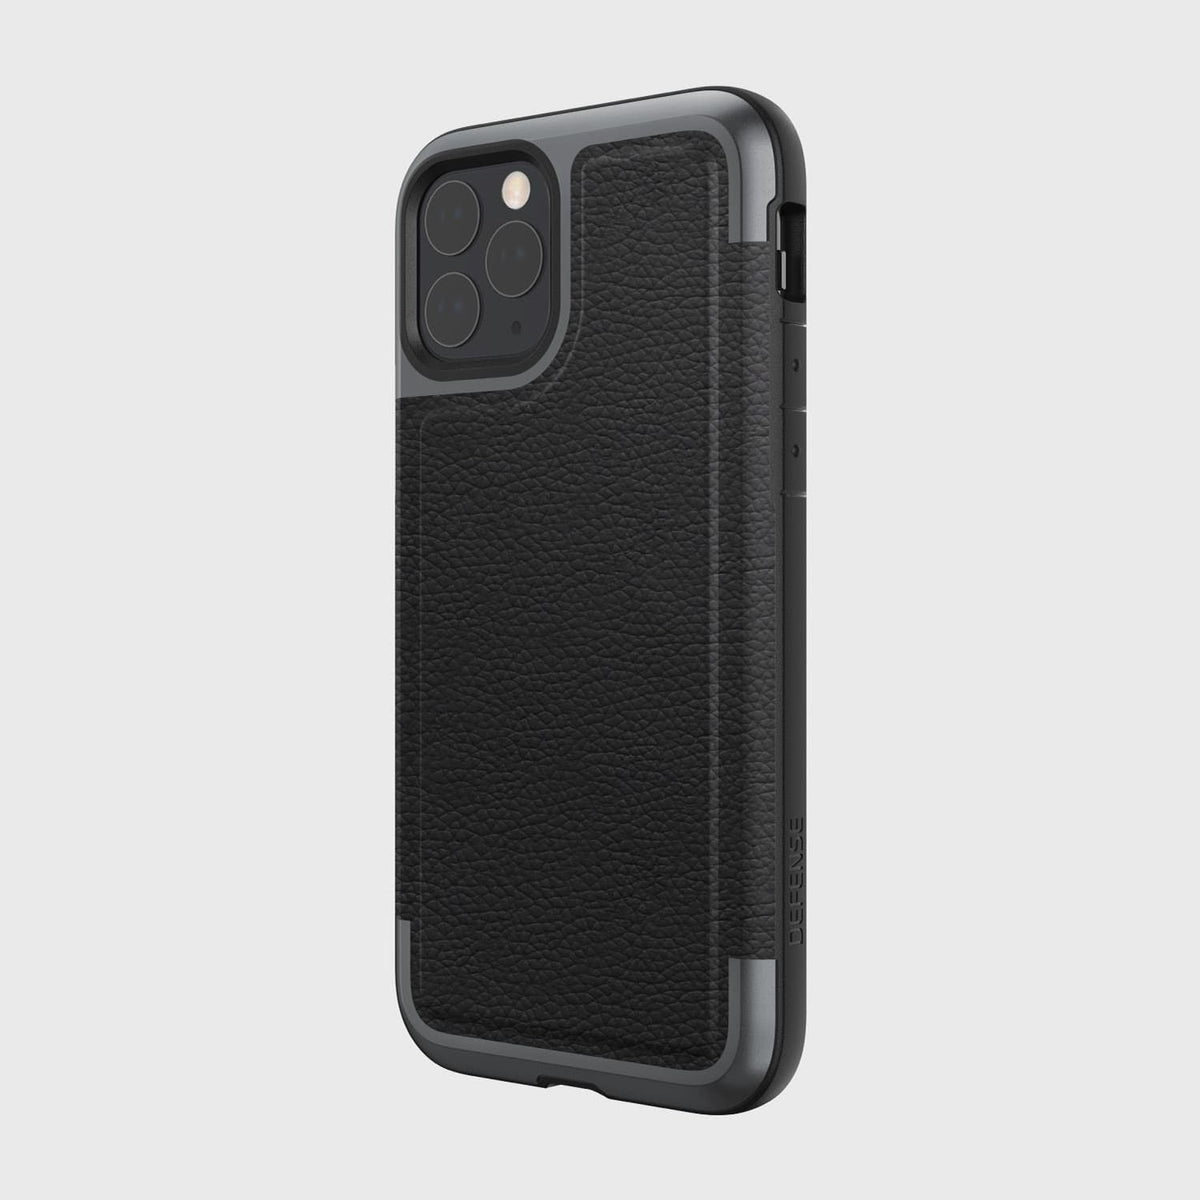 A sleek and sturdy Raptic iPhone 11 Pro Case - Prime, providing reliable drop protection.